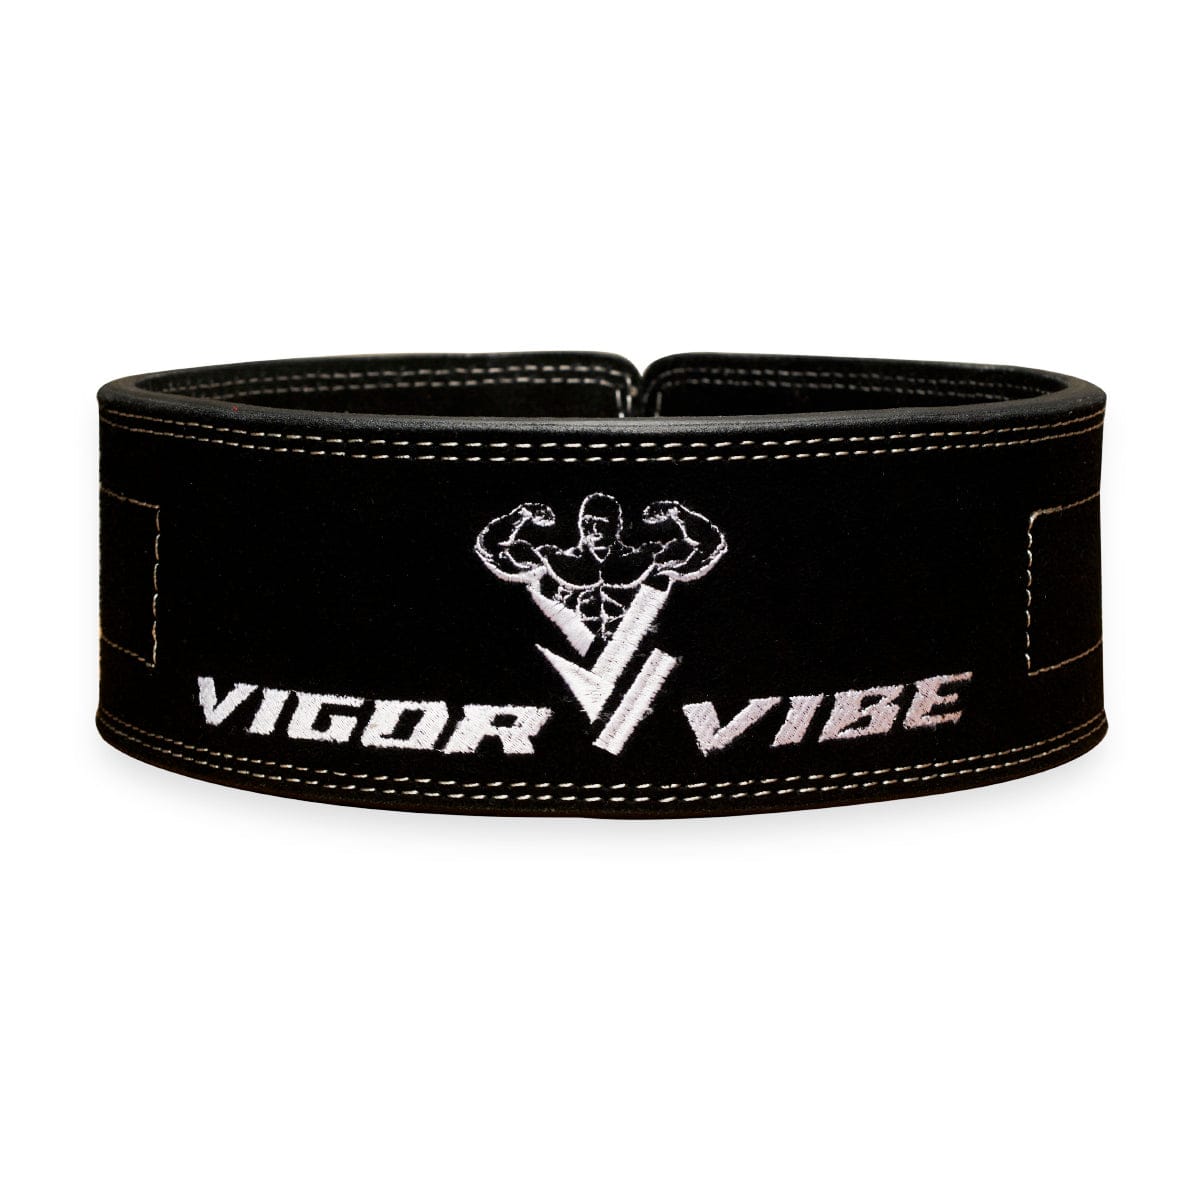 Weight Lifting Belt Power Lifting Belt 10mm Powerlifting Lever Belt 4 Inches Wide